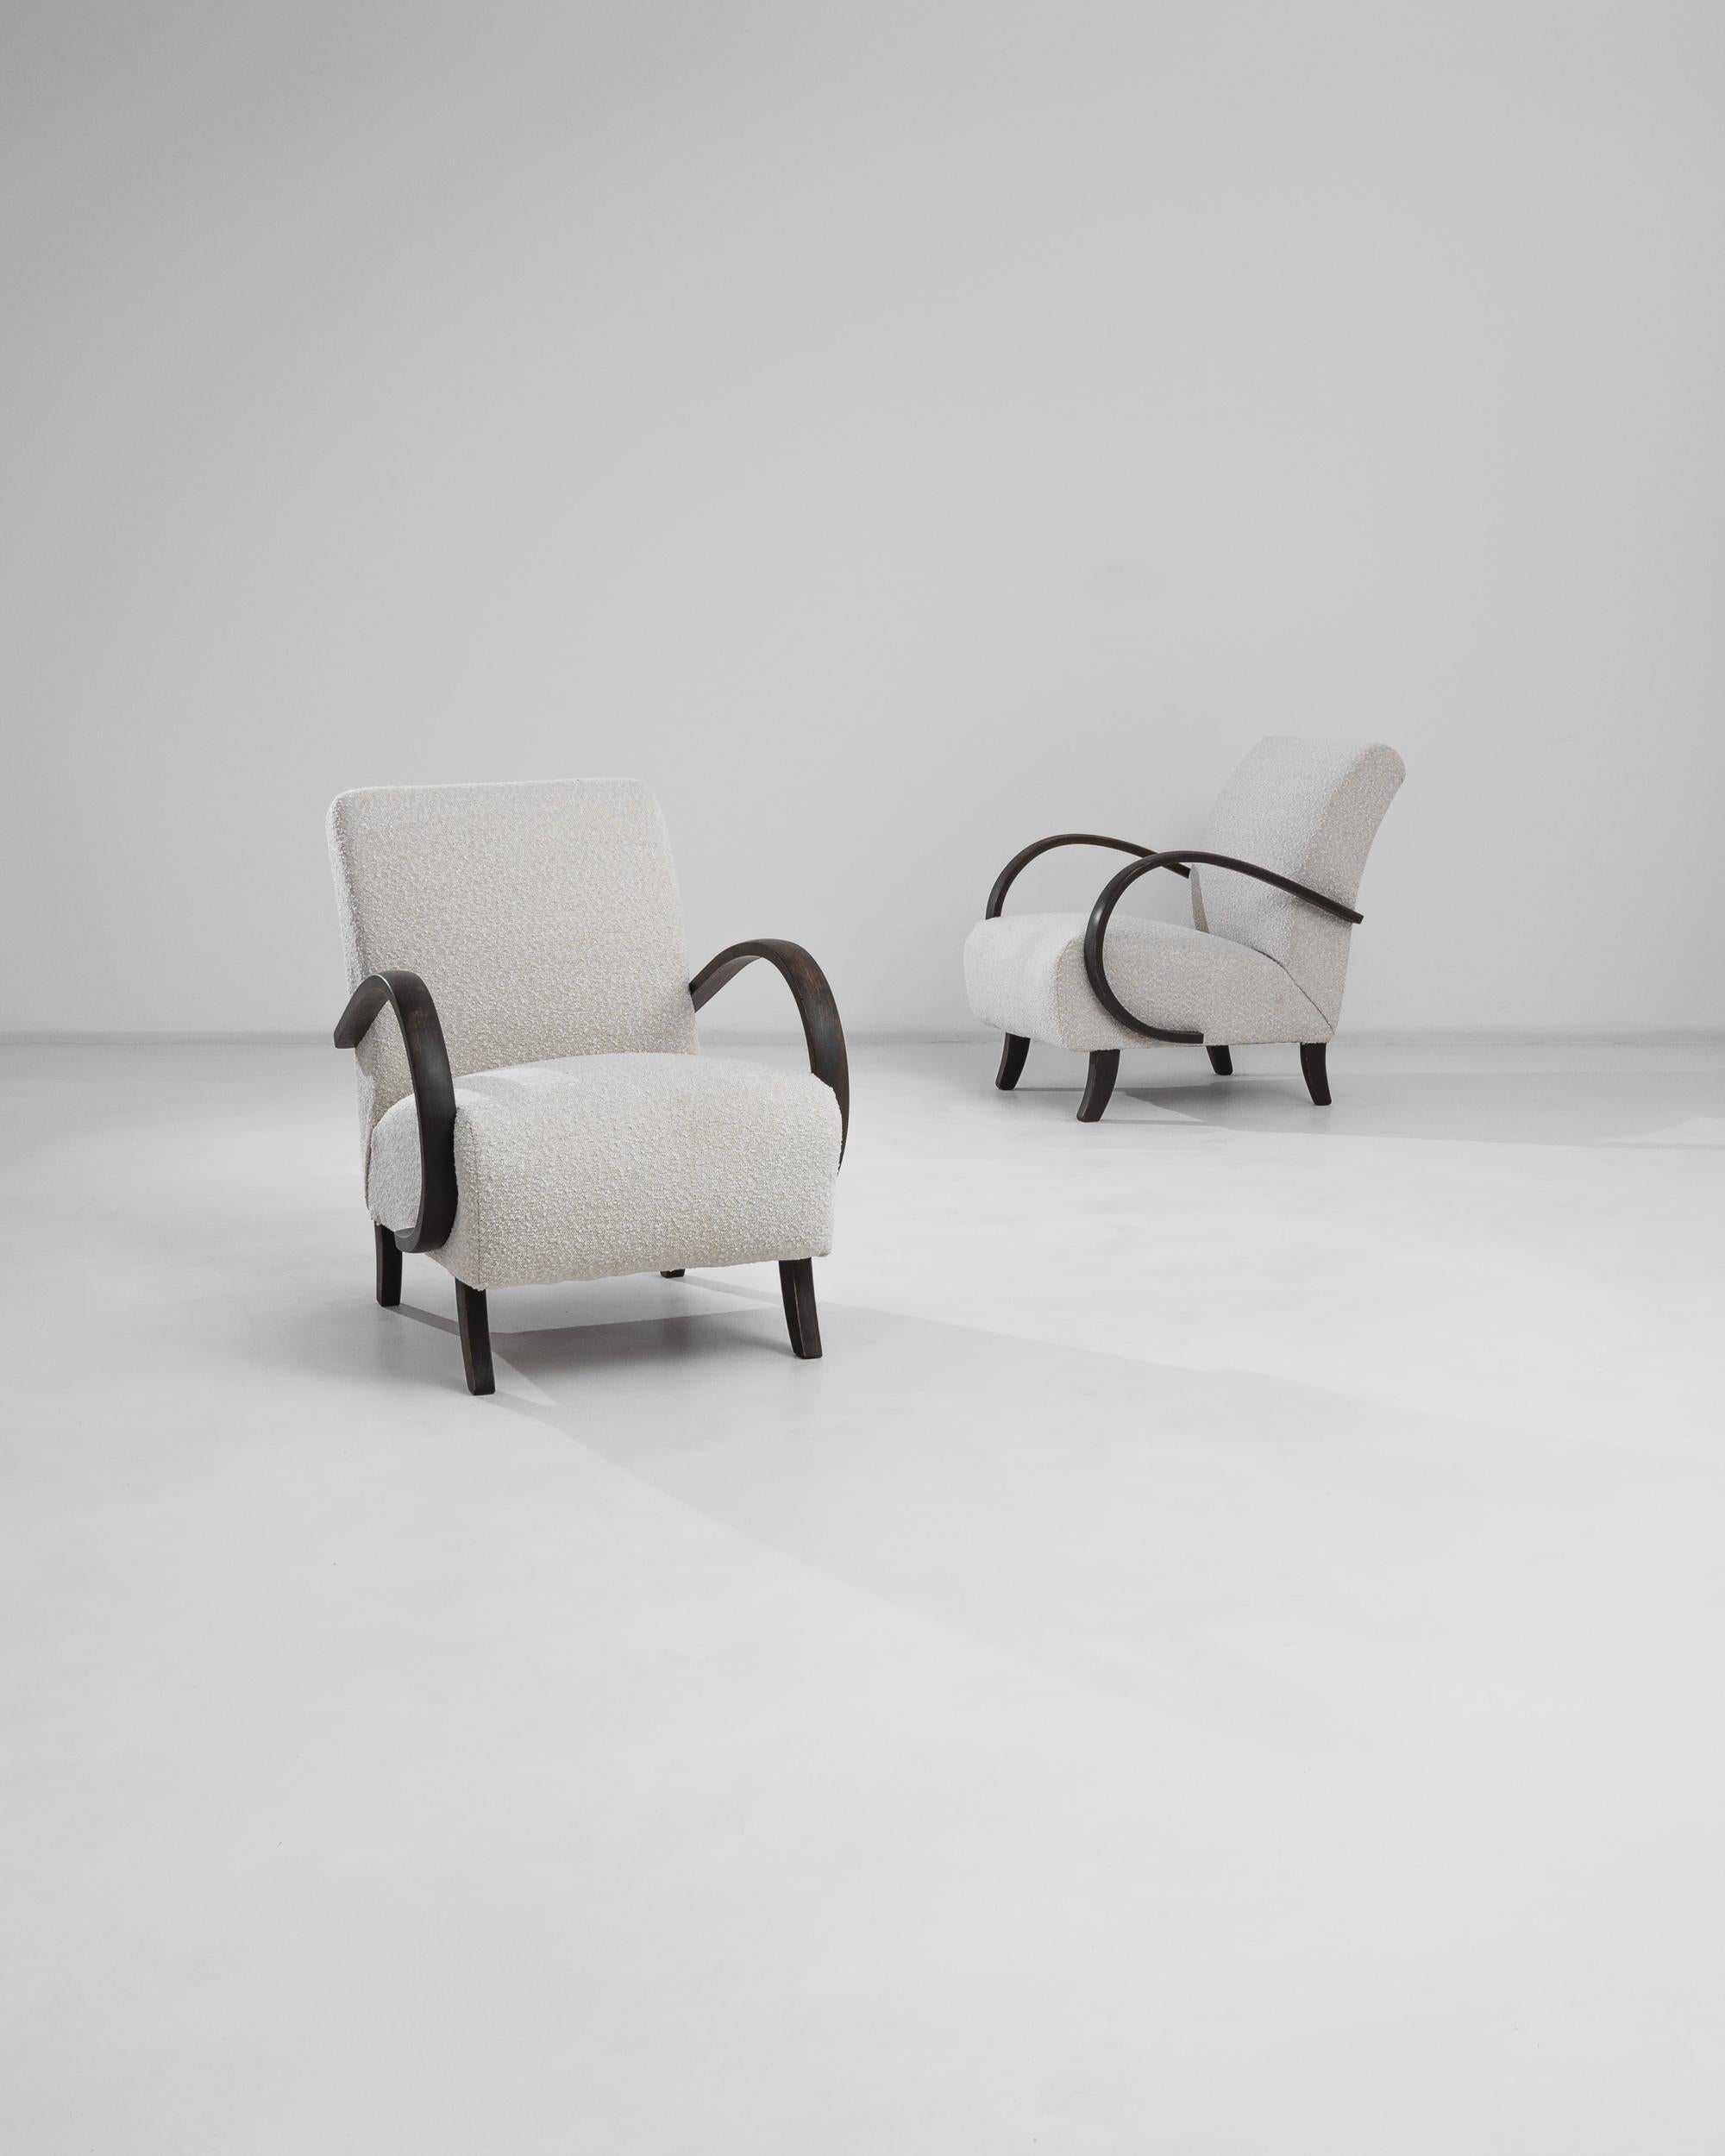 A pair of armchairs by Czech furniture designer J. Halabala. Made in the 1930s, the design was produced in Central European furniture factories throughout the mid-20th Century. The eye-catching silhouette and comfortable shape has had an enduring